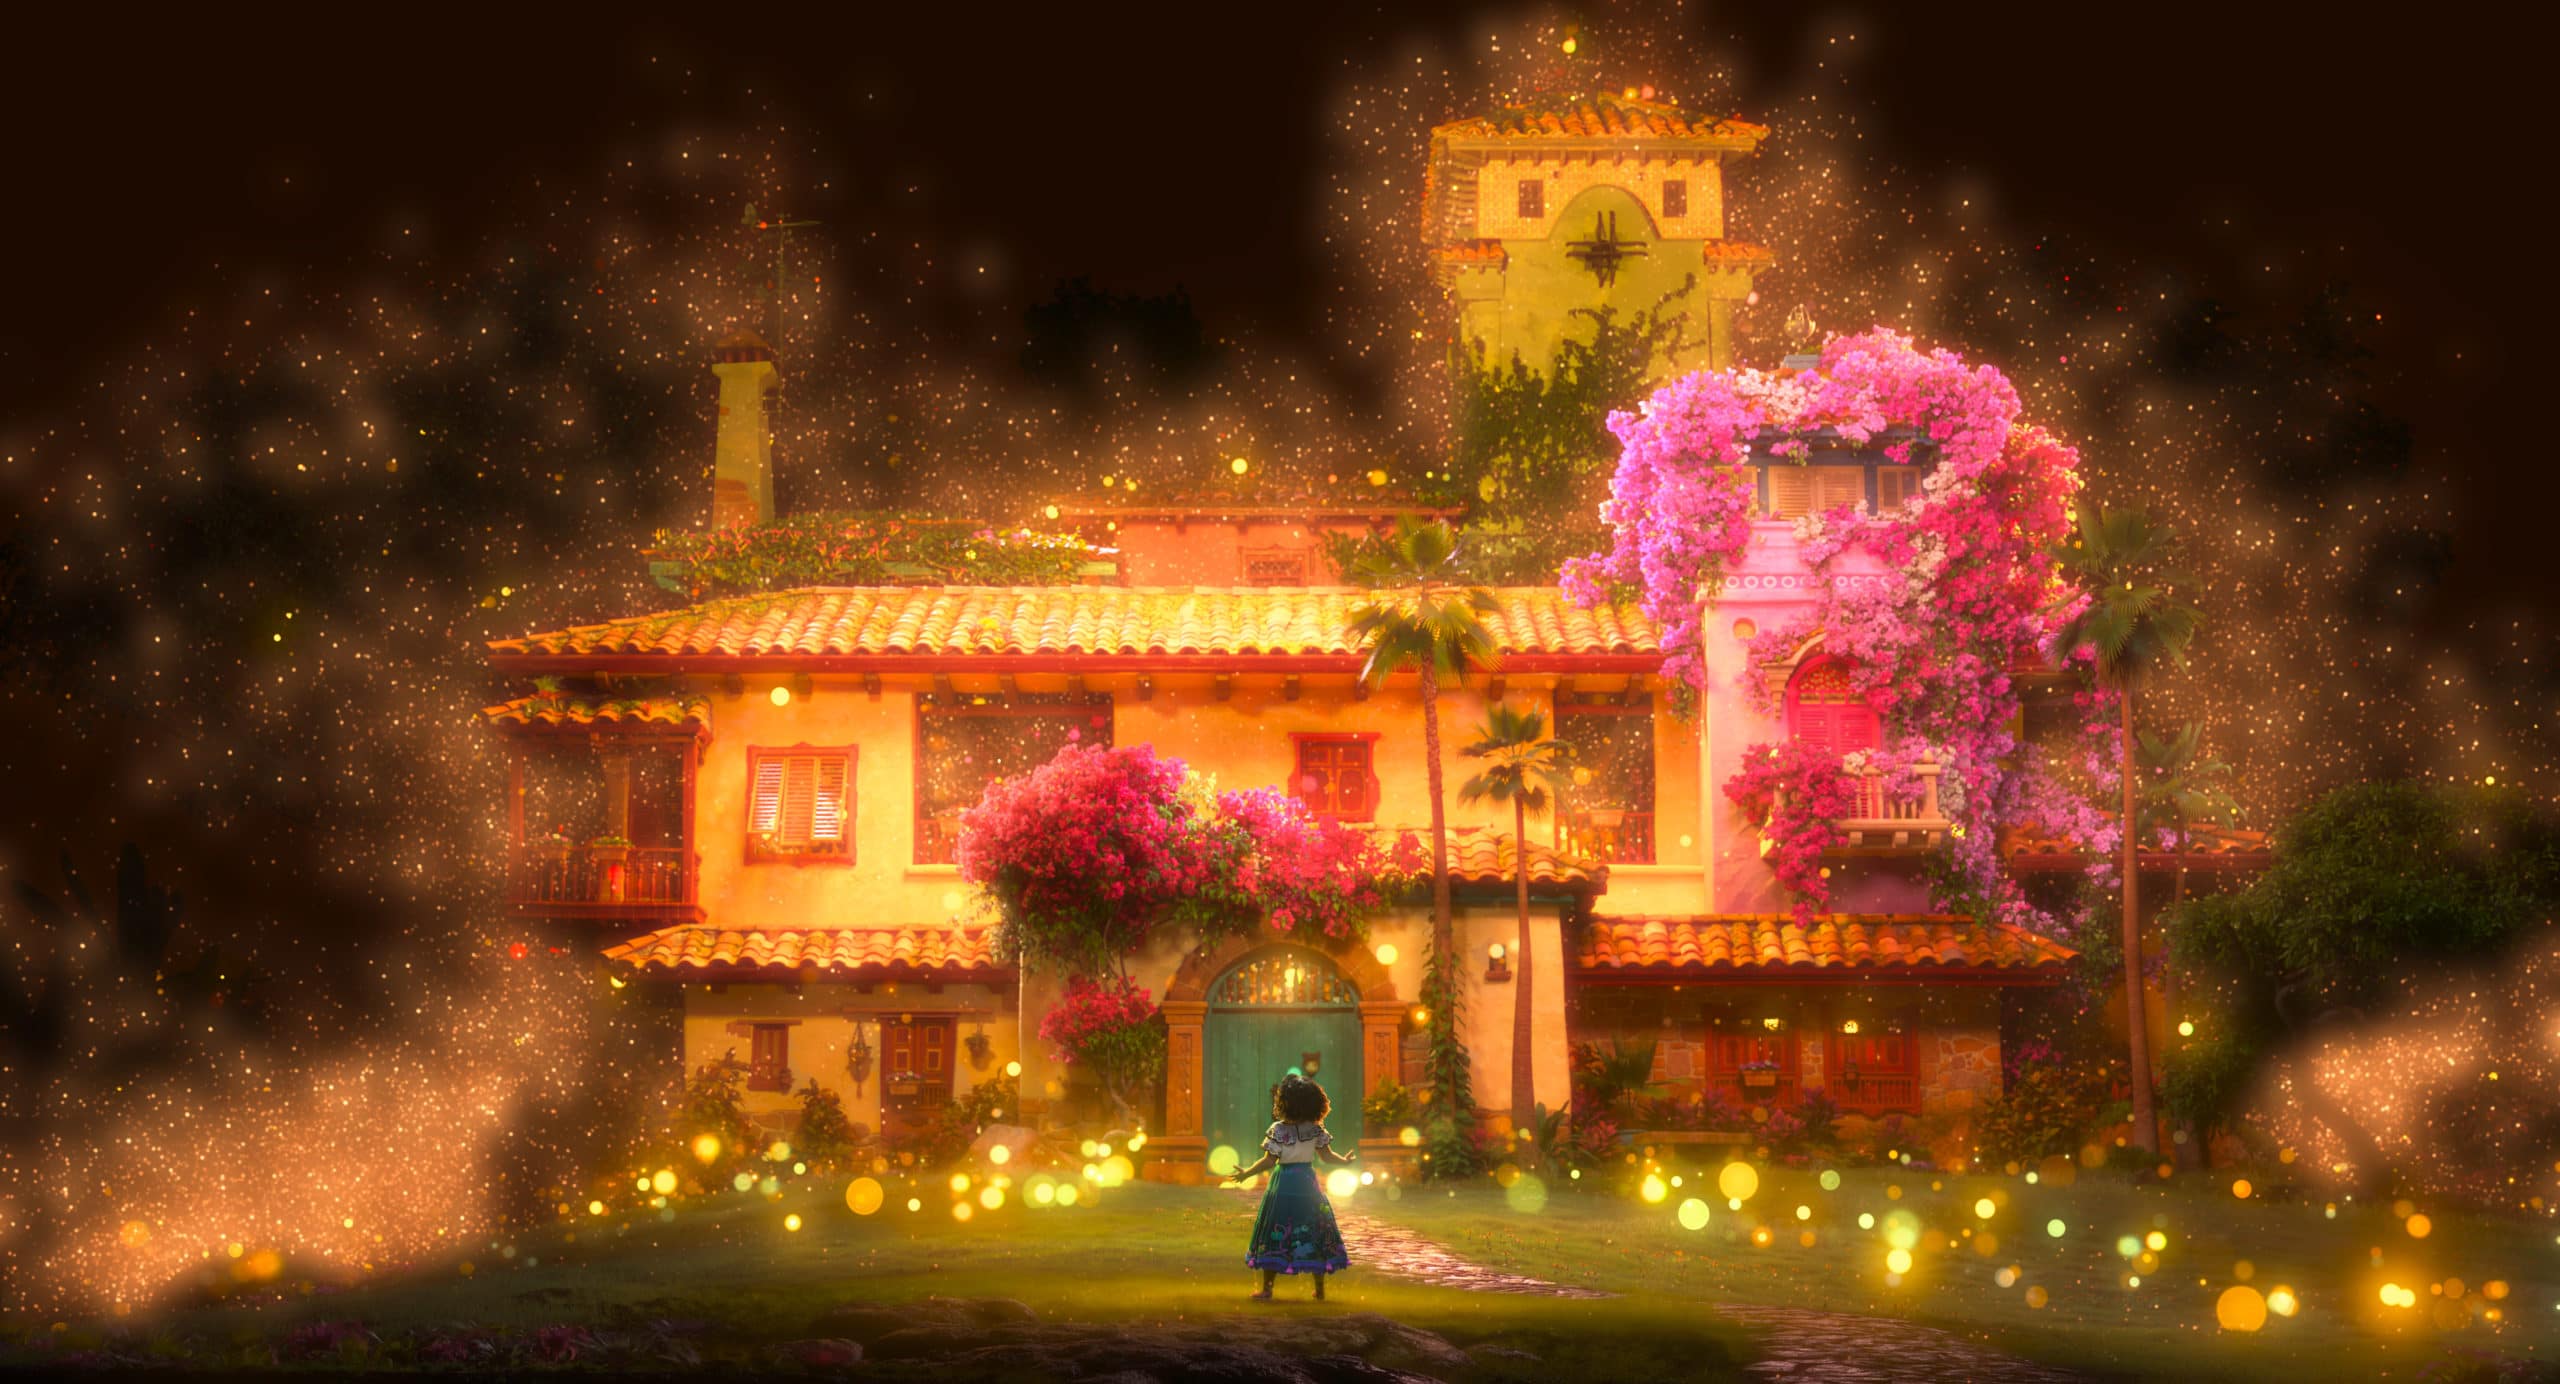 Encanto Writers Reveal The Inspiration For The Madrigal’s Magical House